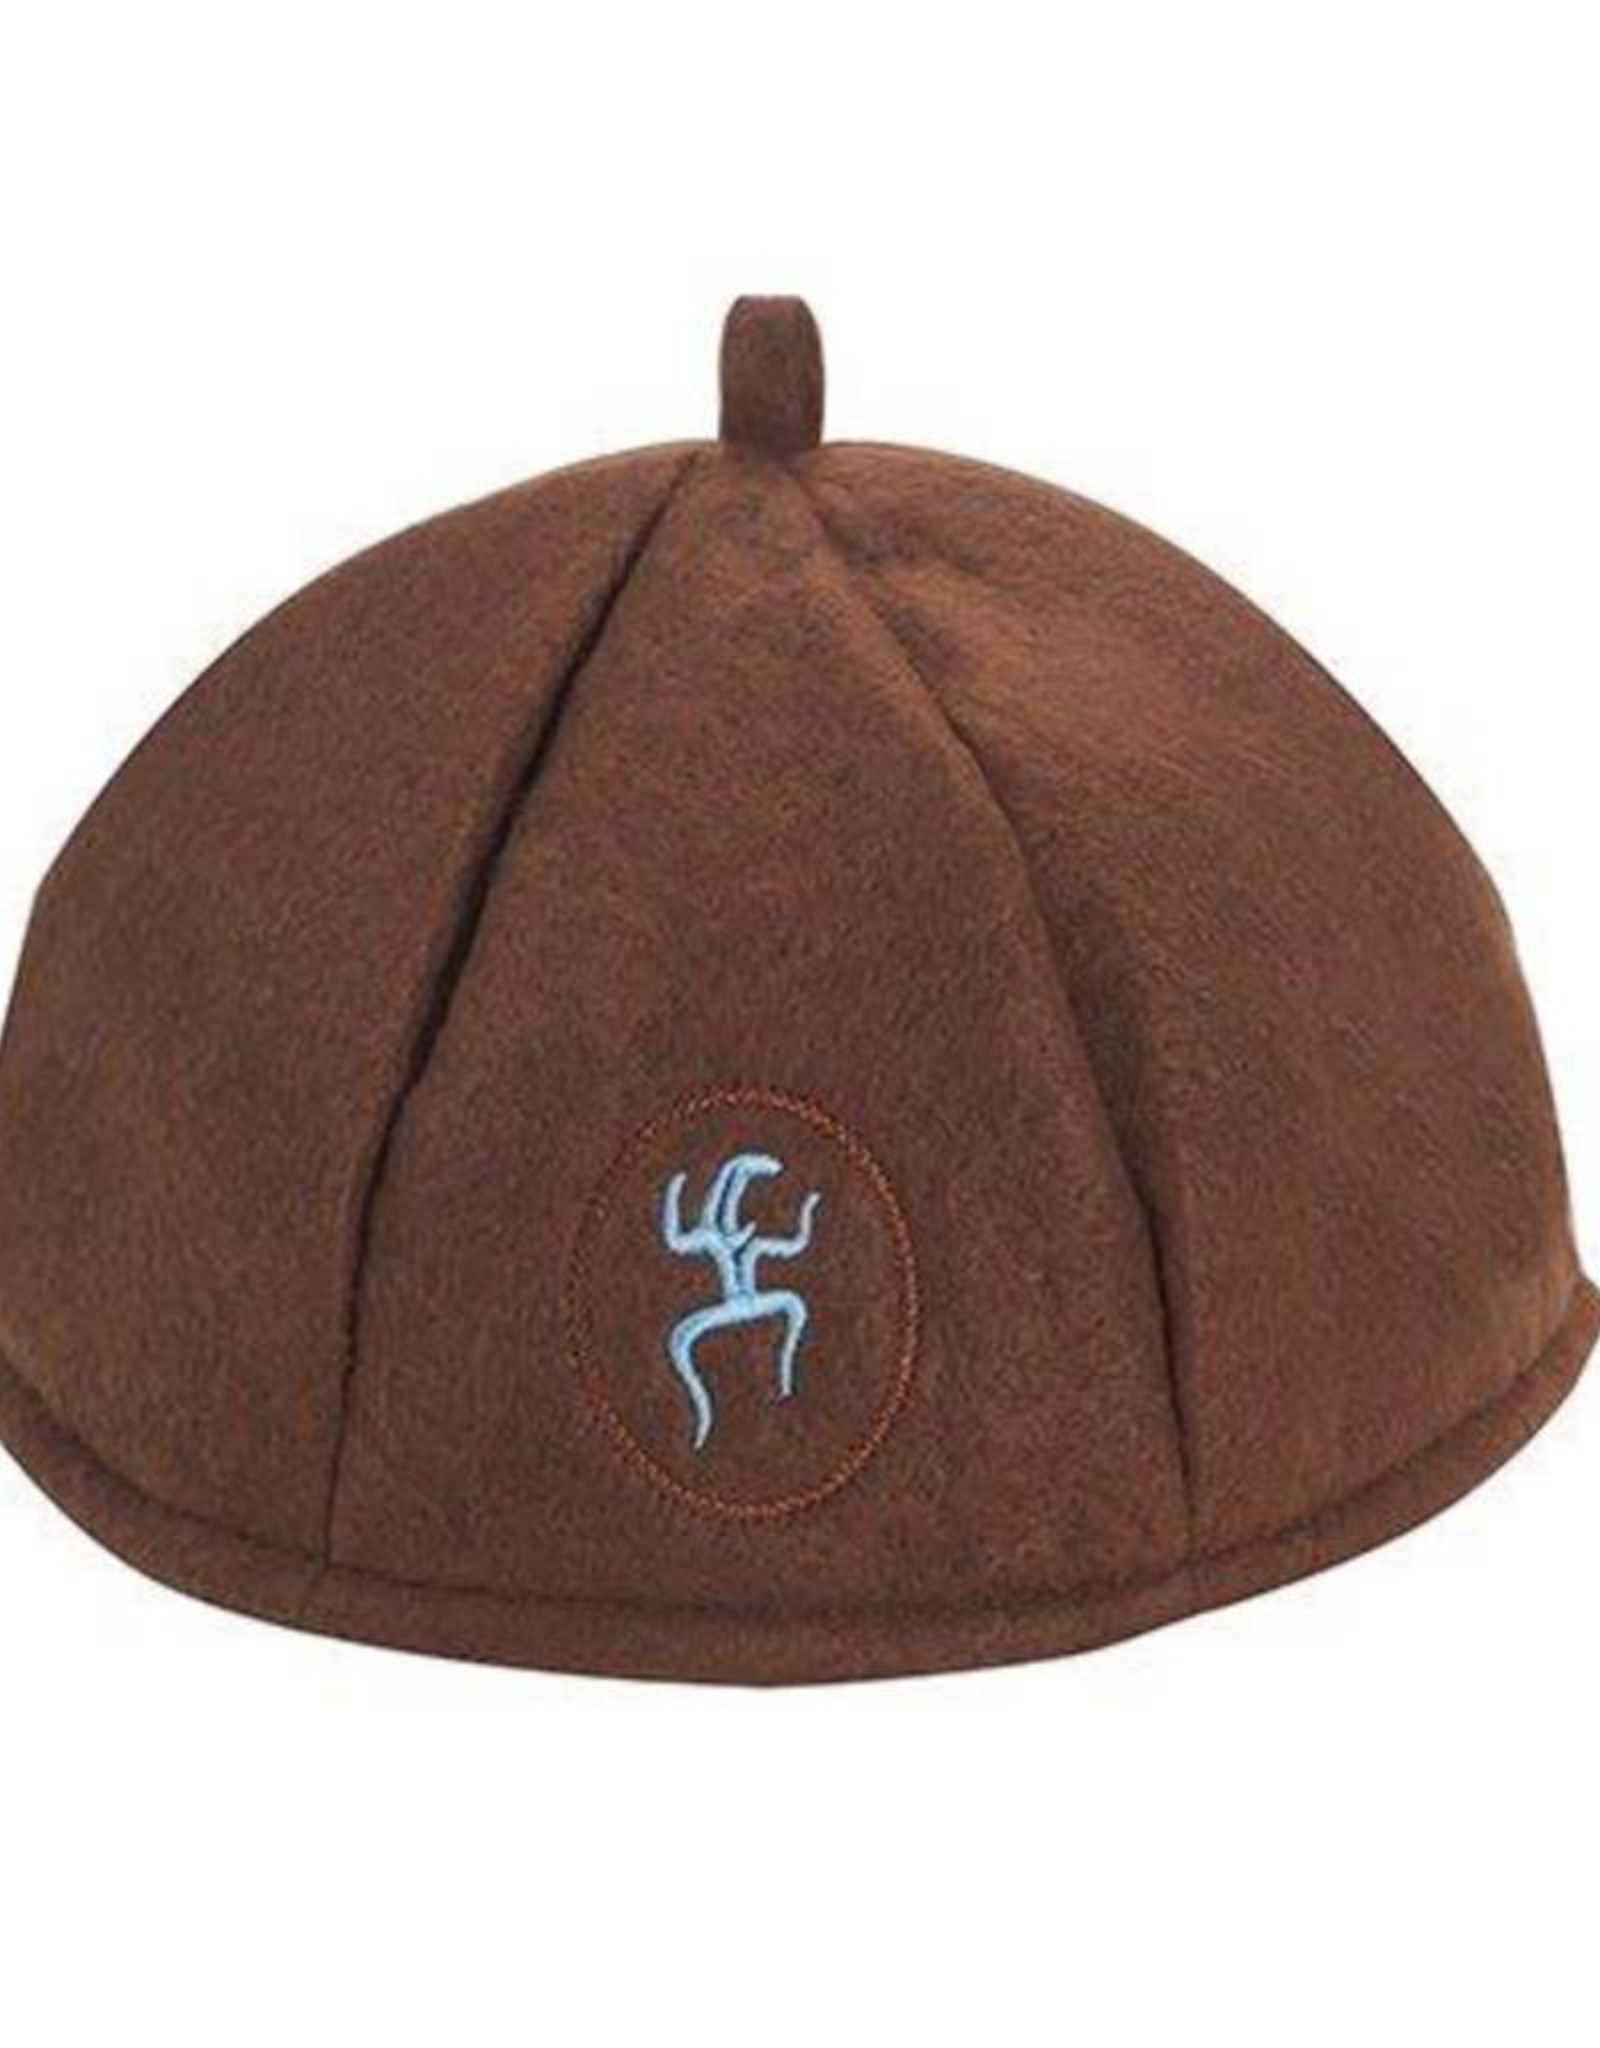 GIRL SCOUTS OF THE USA ! Brownie Beanie